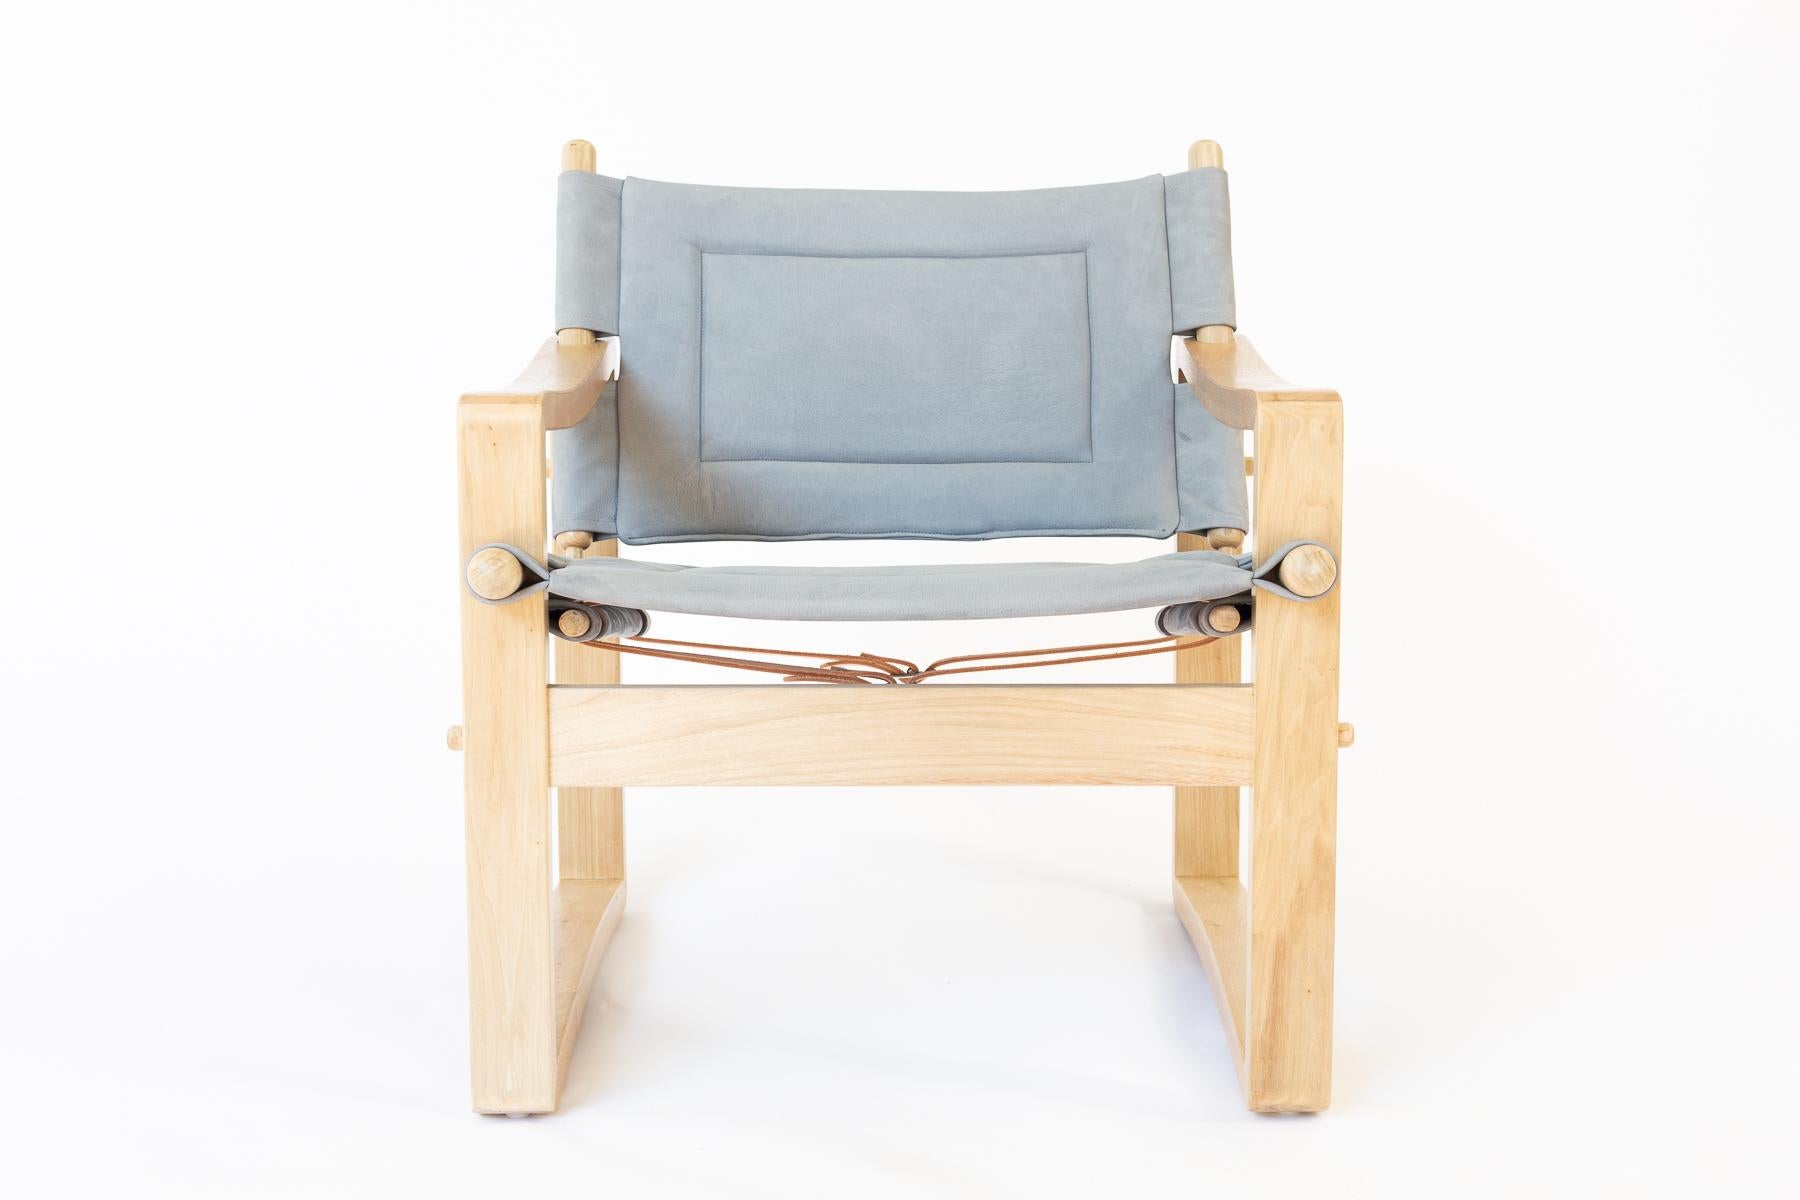 The Campaign Safari chair is a reference to Danish furniture mid-century design from the 1960s with its simple and gracefully curved frame. Upholstered with a sling seat affixed with sturdy leather straps, the chair is meticulously constructed with